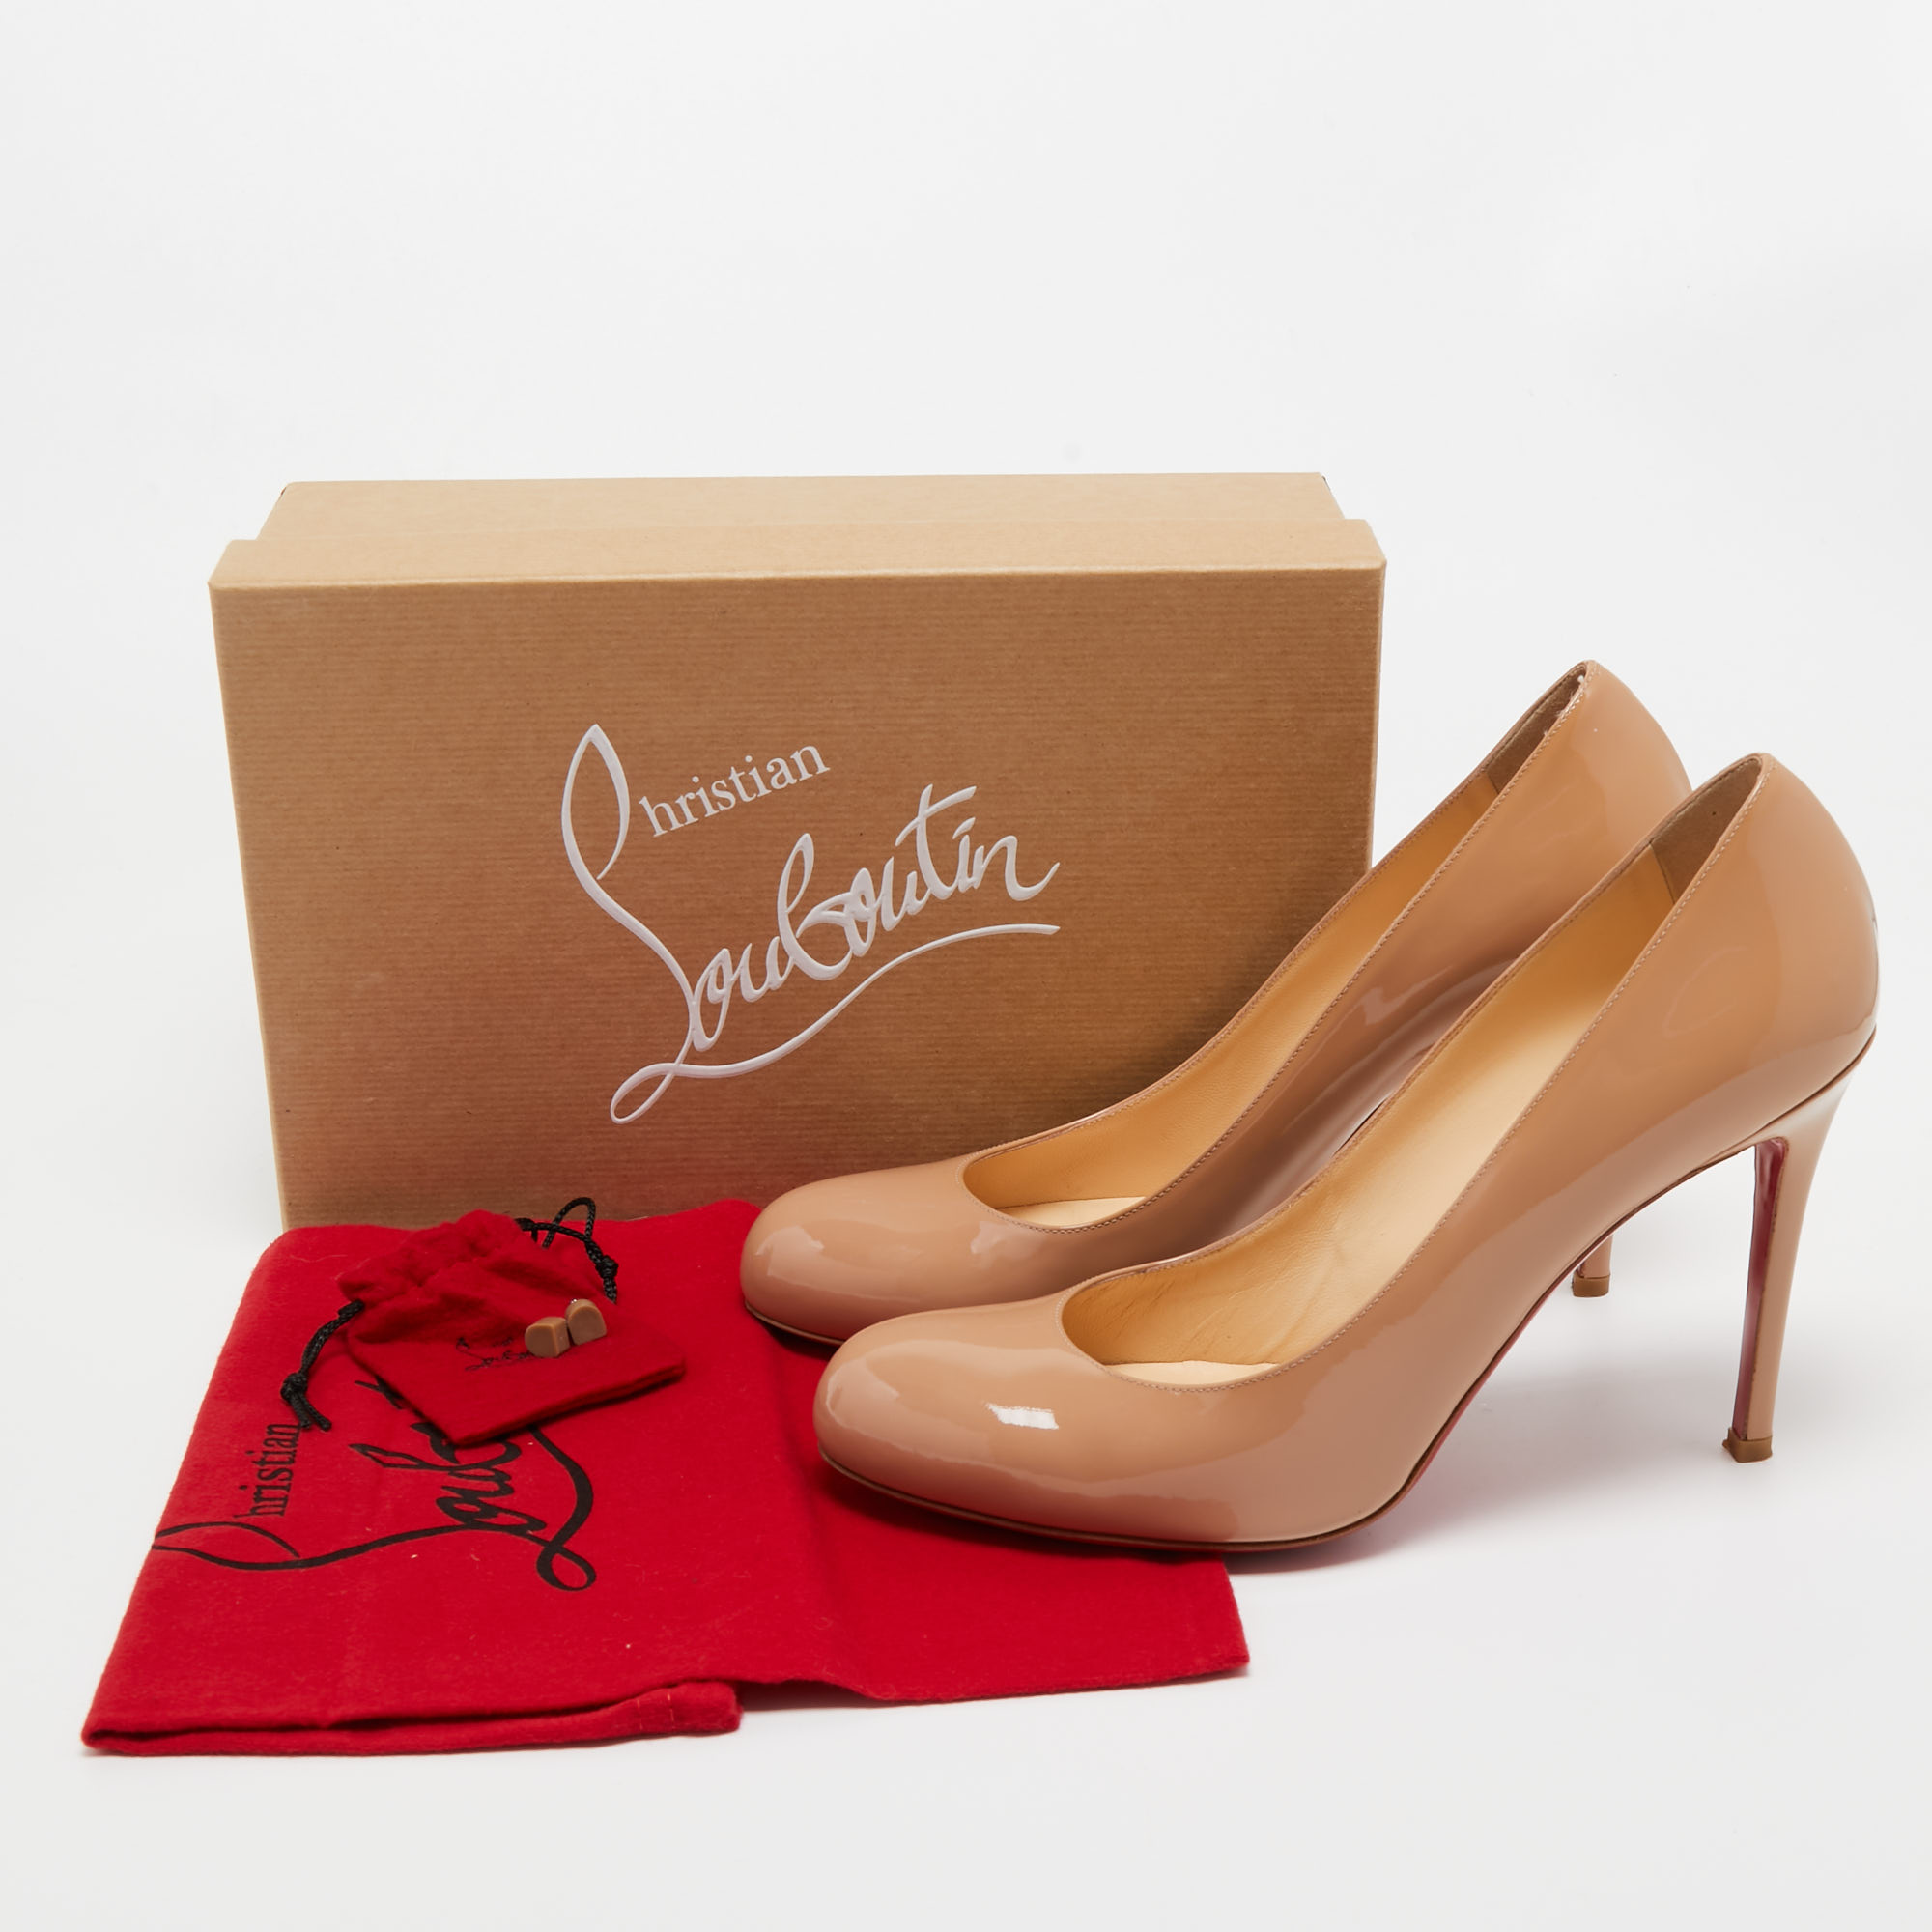 Christian Louboutin Beige Patent Leather Simple Pumps Size 41